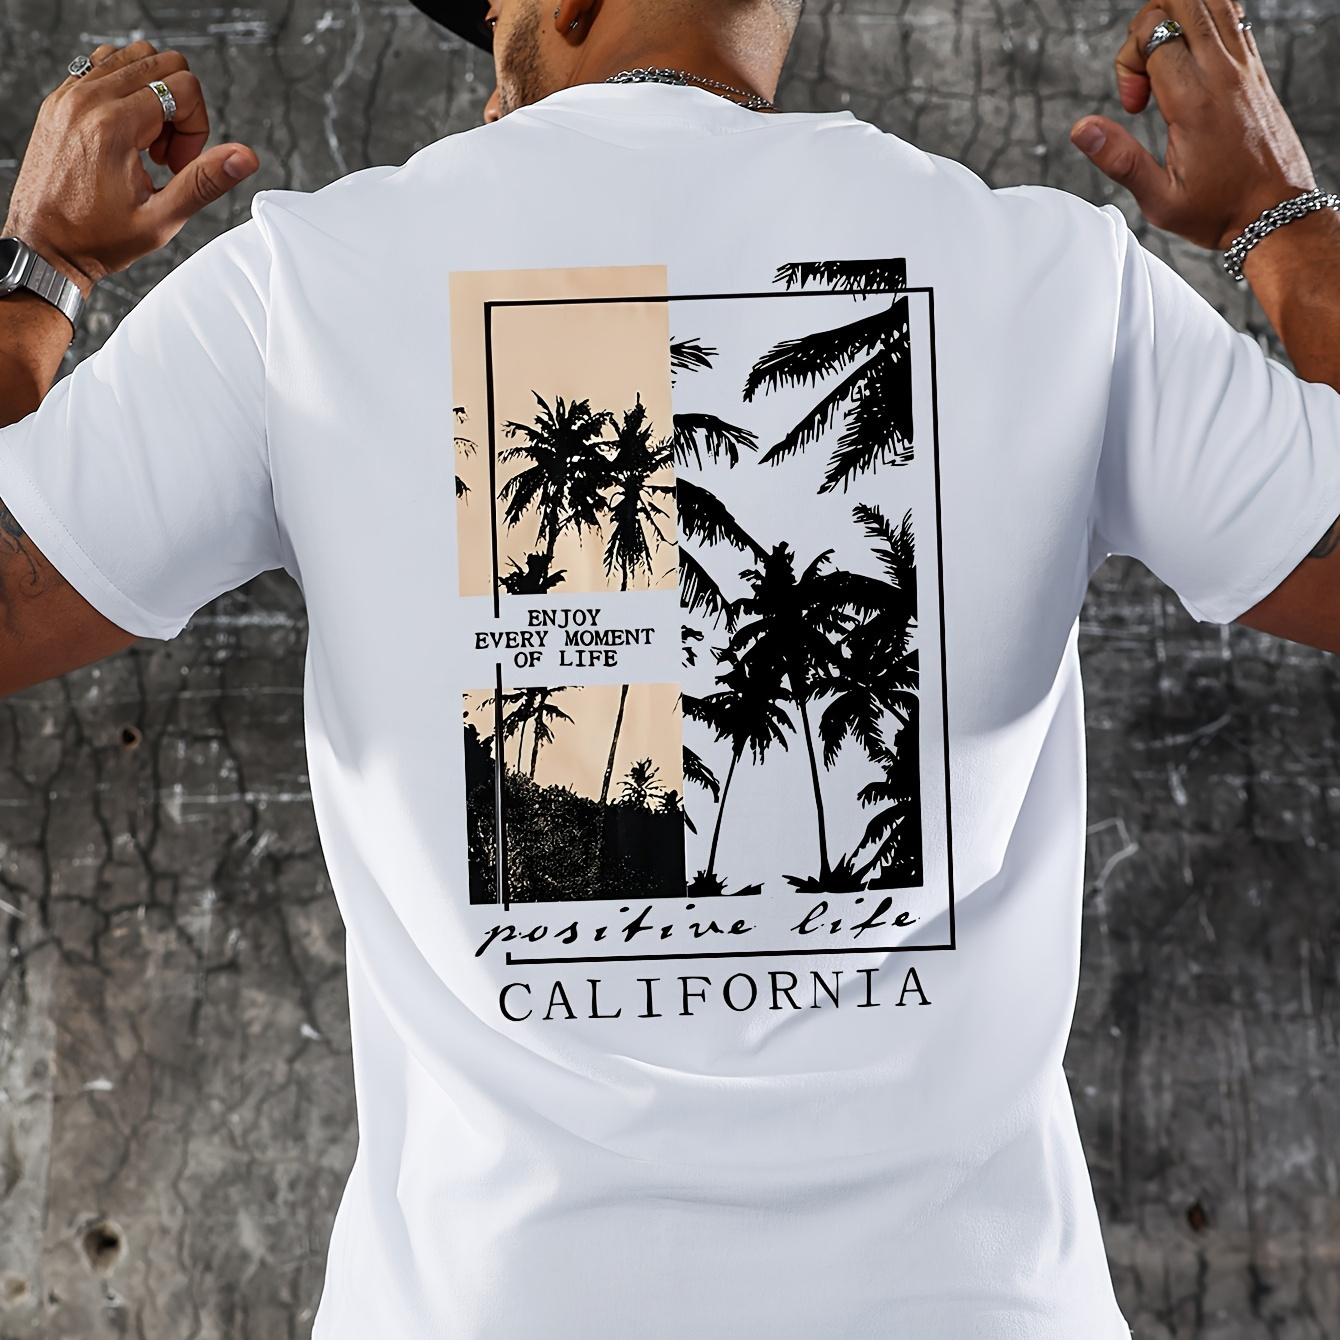 

California Palm Tree Pattern Print Crew Neck Short Sleeve T-shirt For Men, Casual Summer T-shirt For Daily Wear And Vacation Resorts